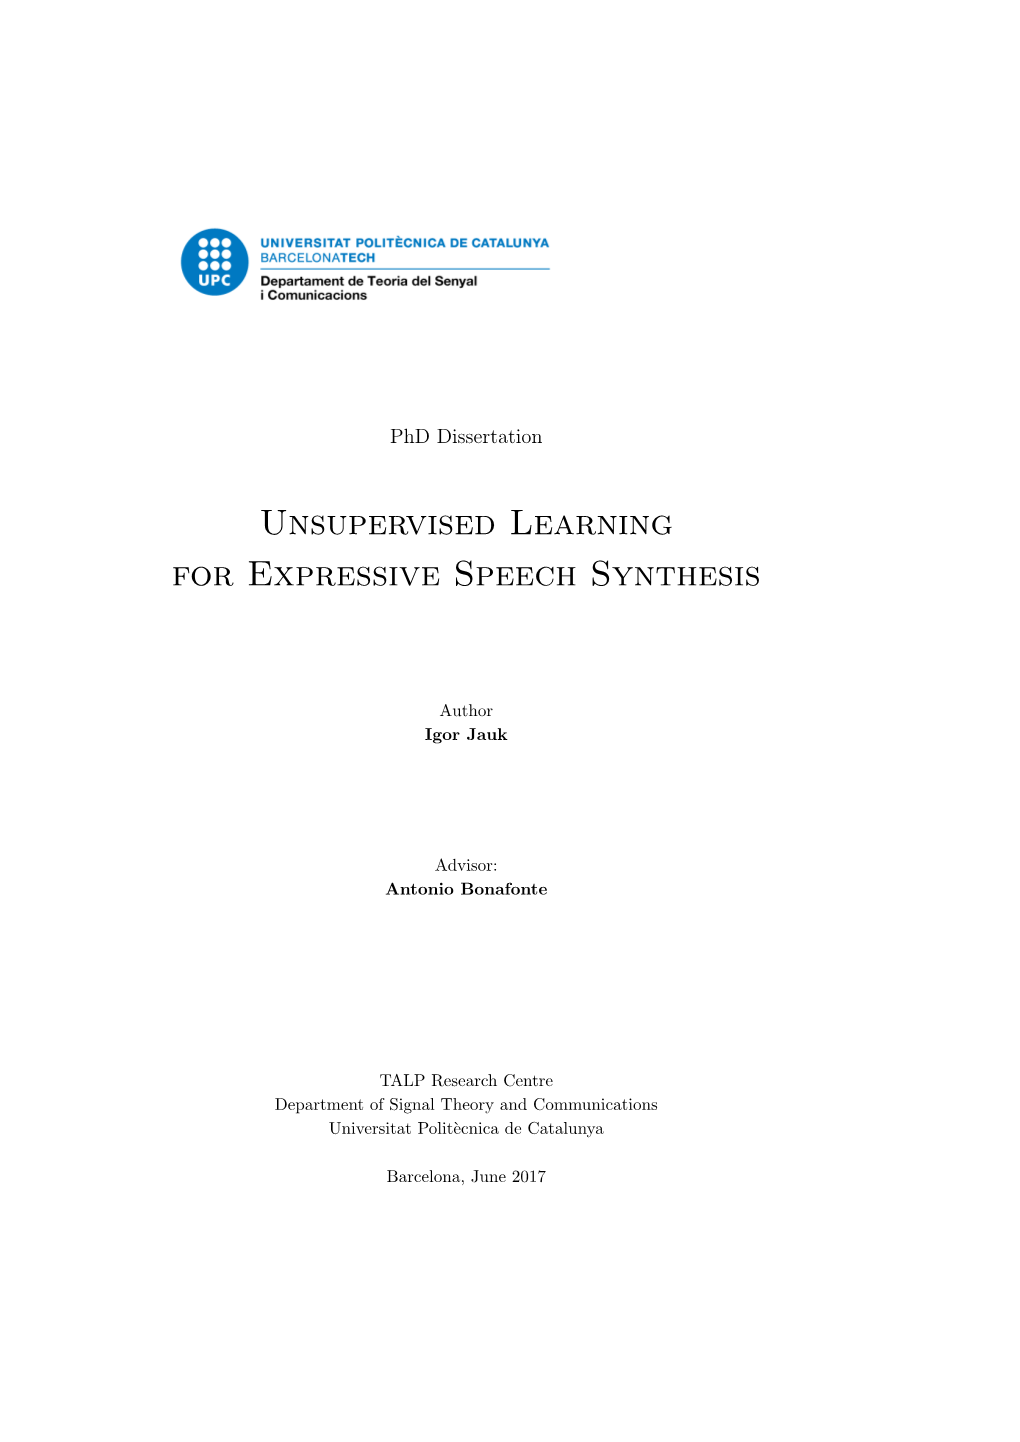 Unsupervised Learning for Expressive Speech Synthesis